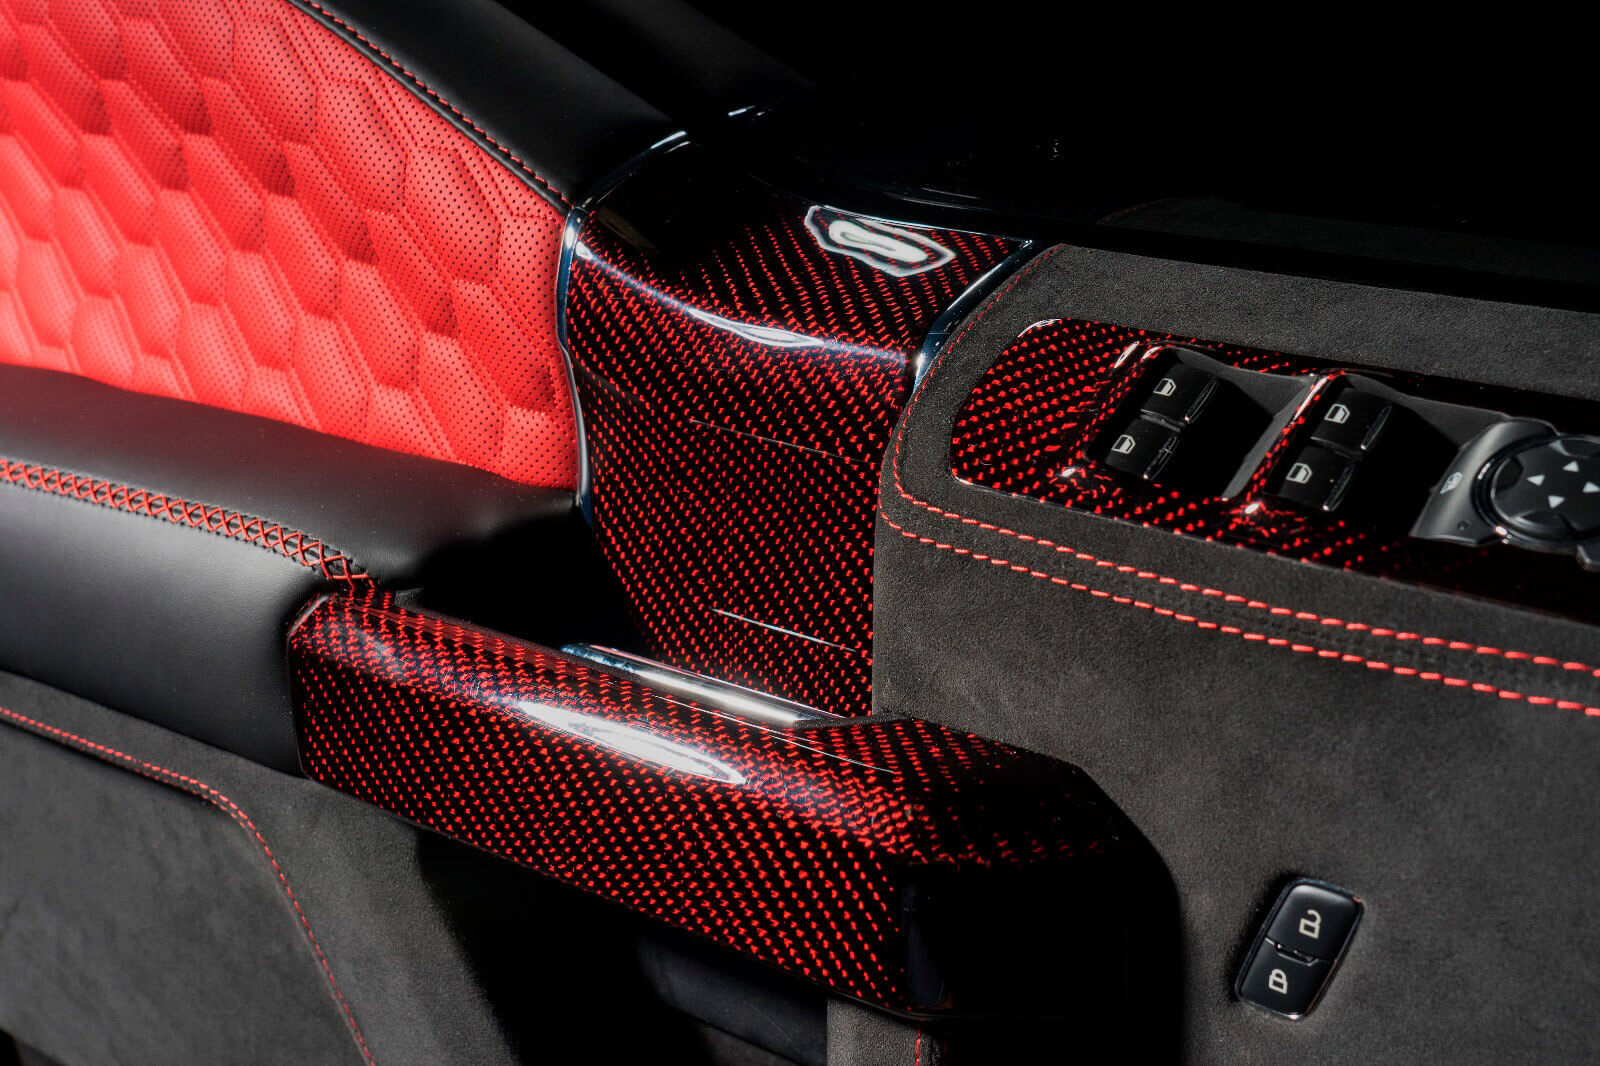 CarBone - Cool stuff for air cooled enthusiasts. Car interior design,  upholstery and custom elements.